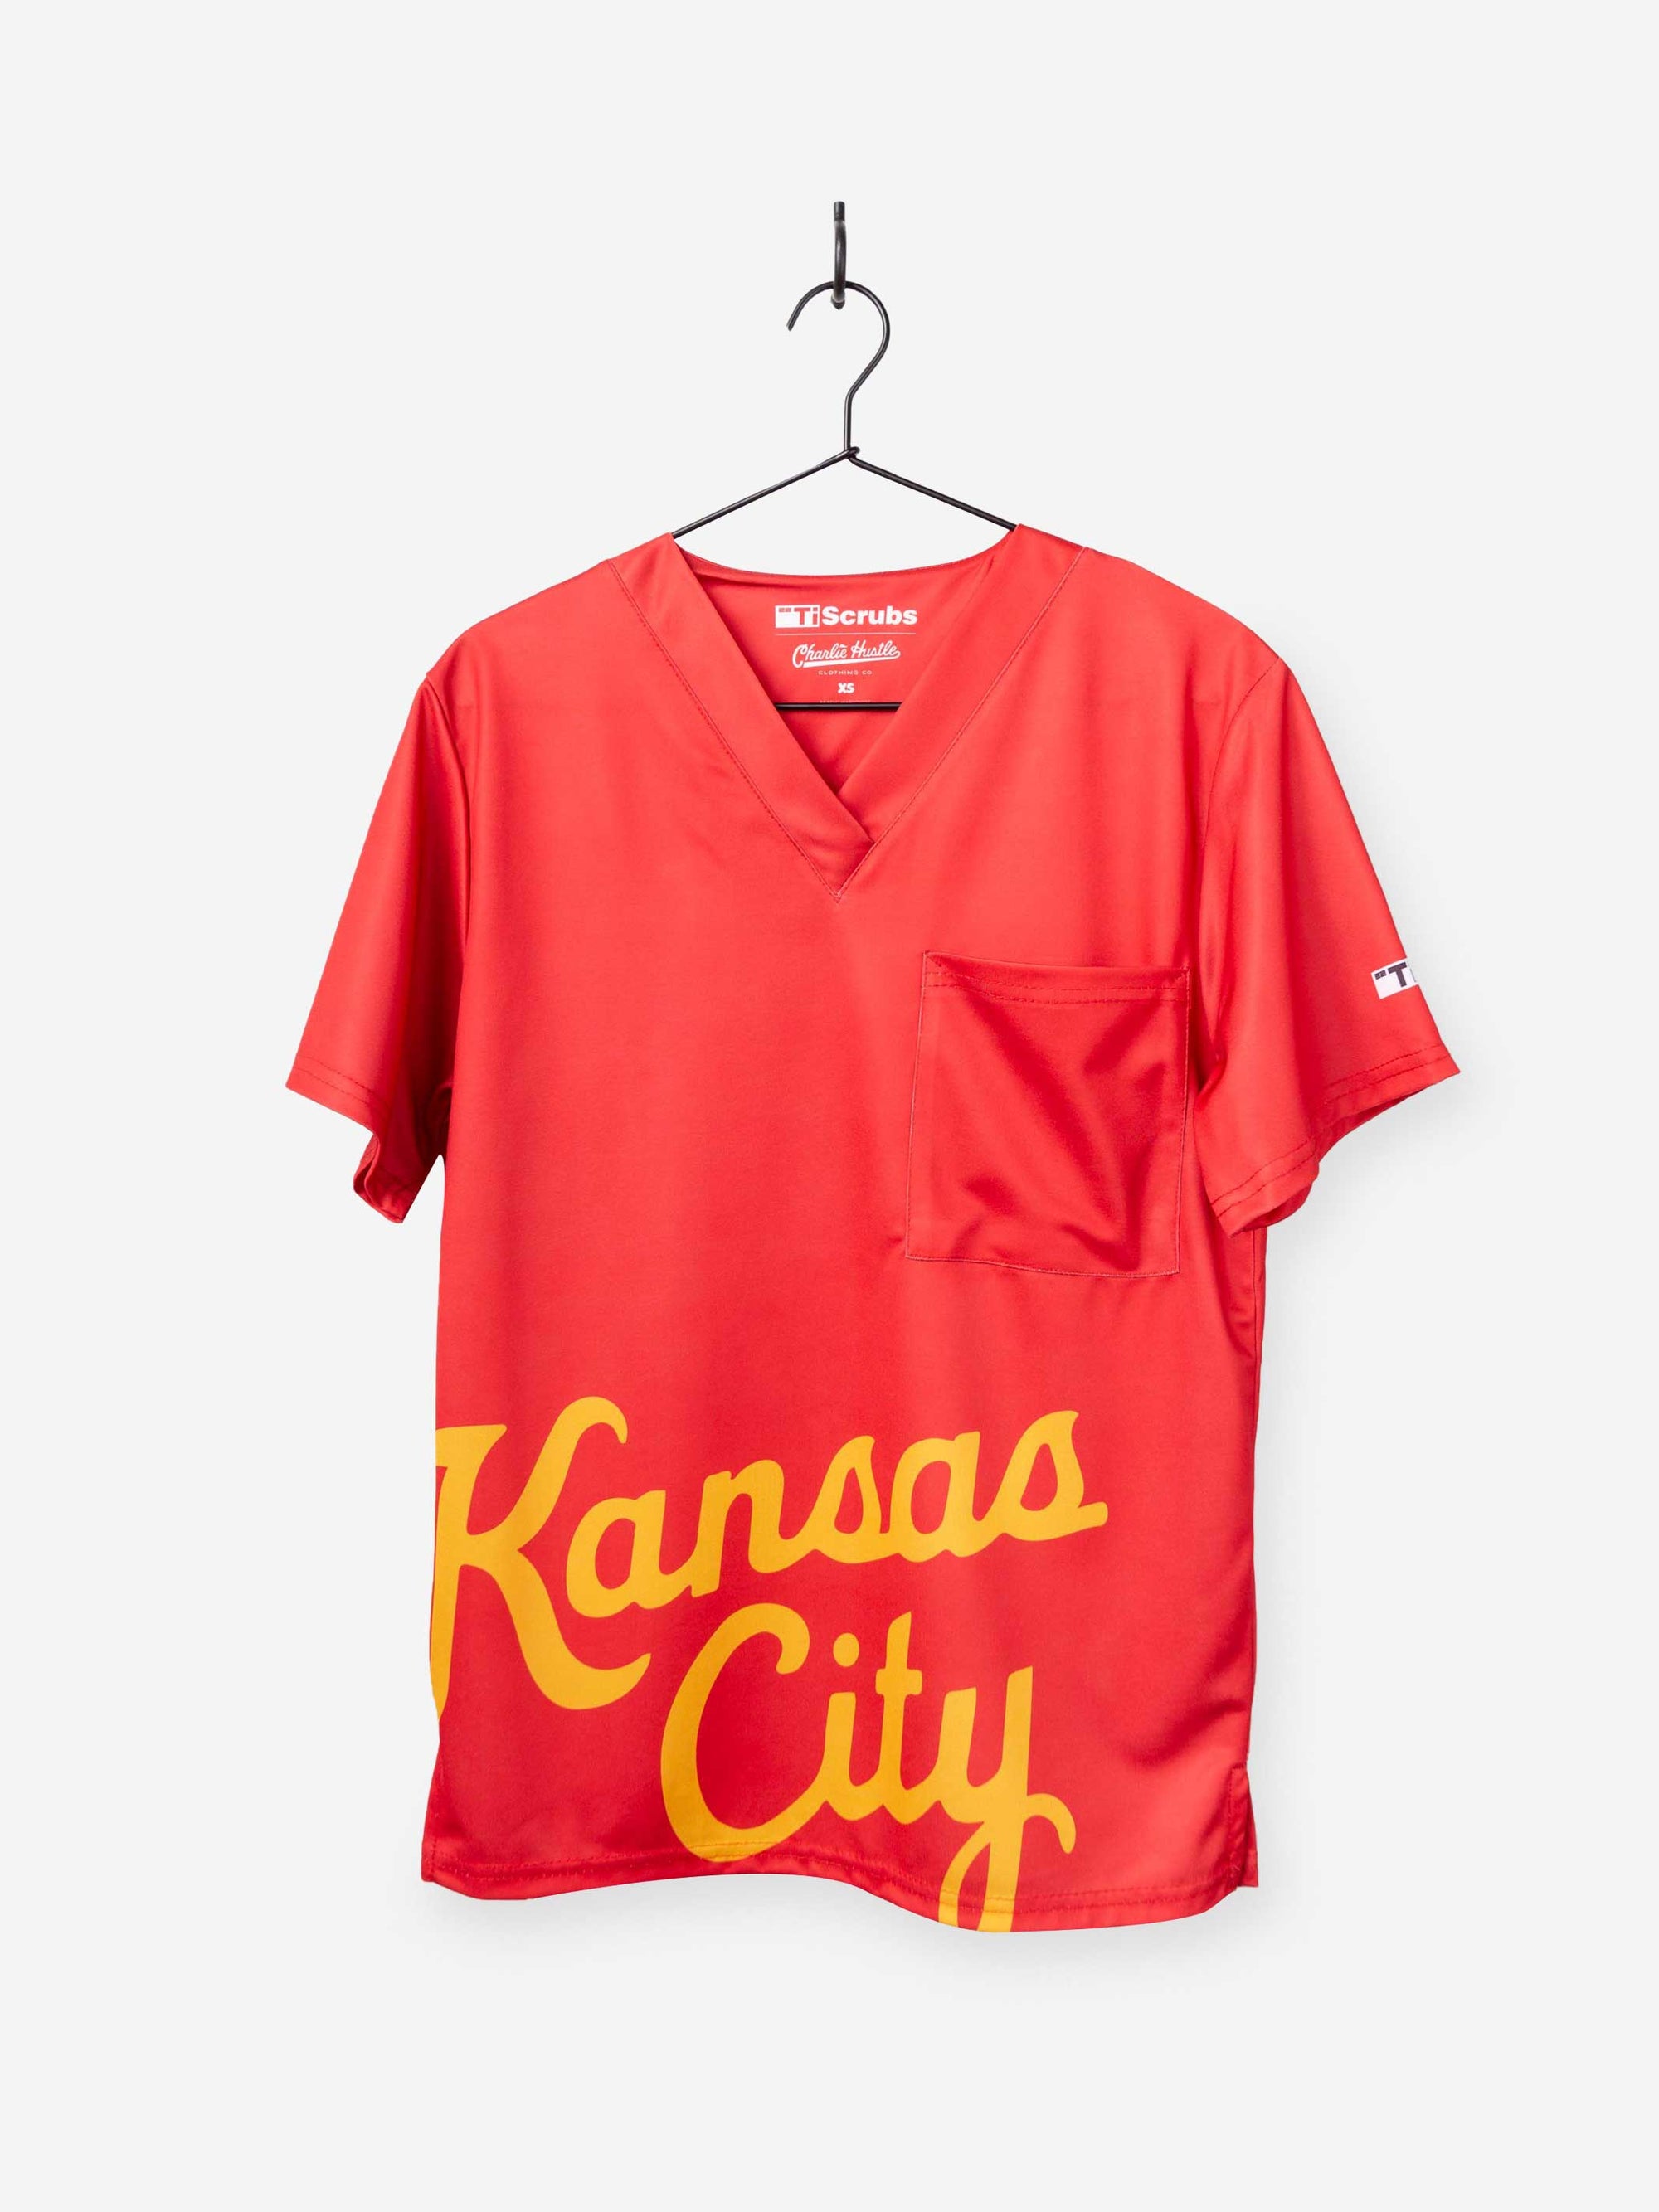 Men's Charlie Hustle Print Scrub Top with Kansas City Script in Red and Gold